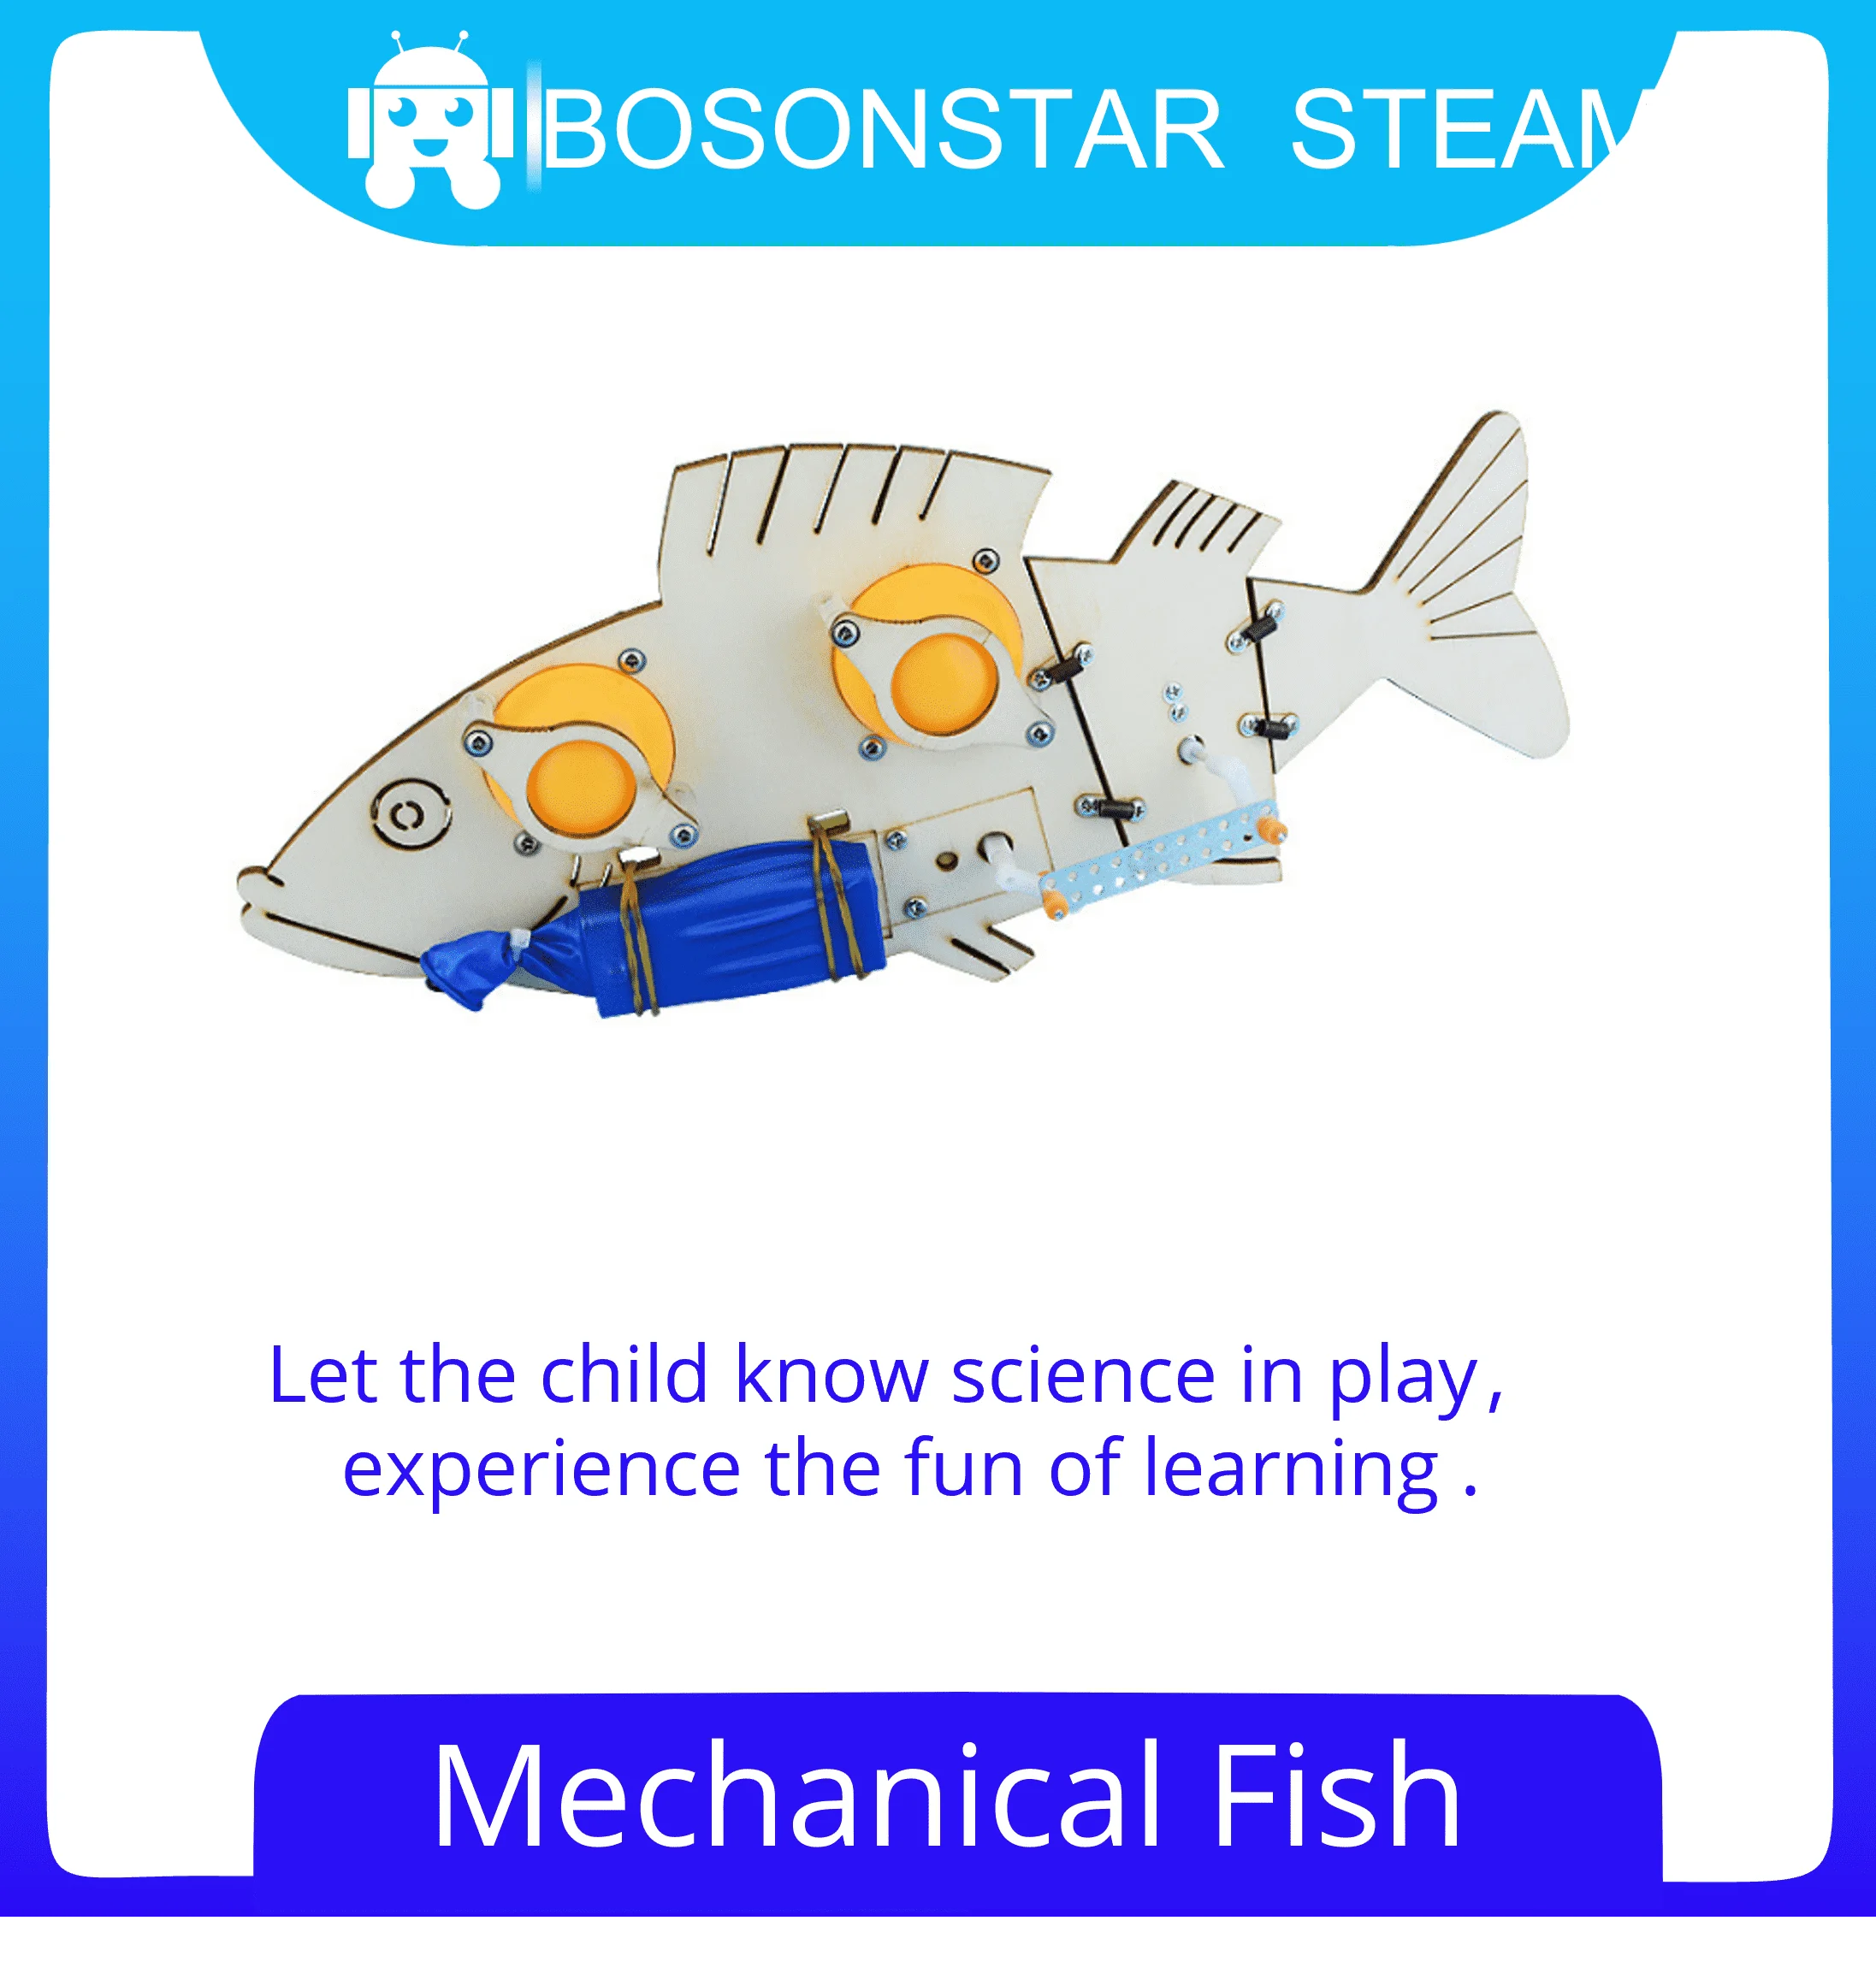 DIY Assembled Model  Electric Wood  Mechanical Fish Science Discovery  STEM Education Physics Experiment Kit  For Children Schoo